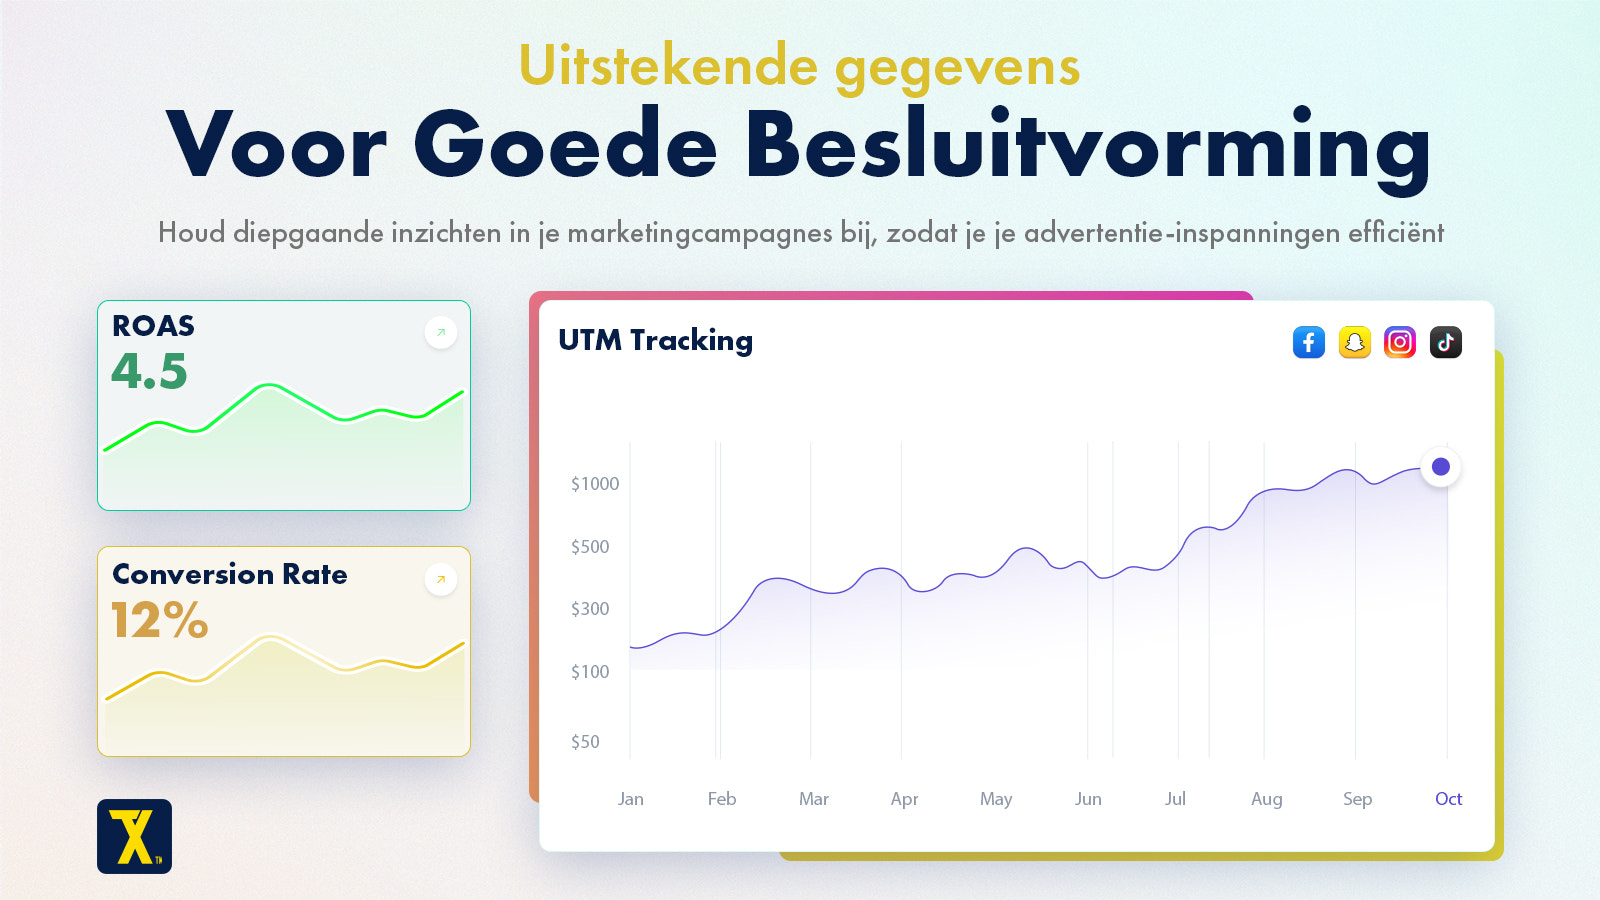 More accurate attribution with UTM tracking detailed breakdowns